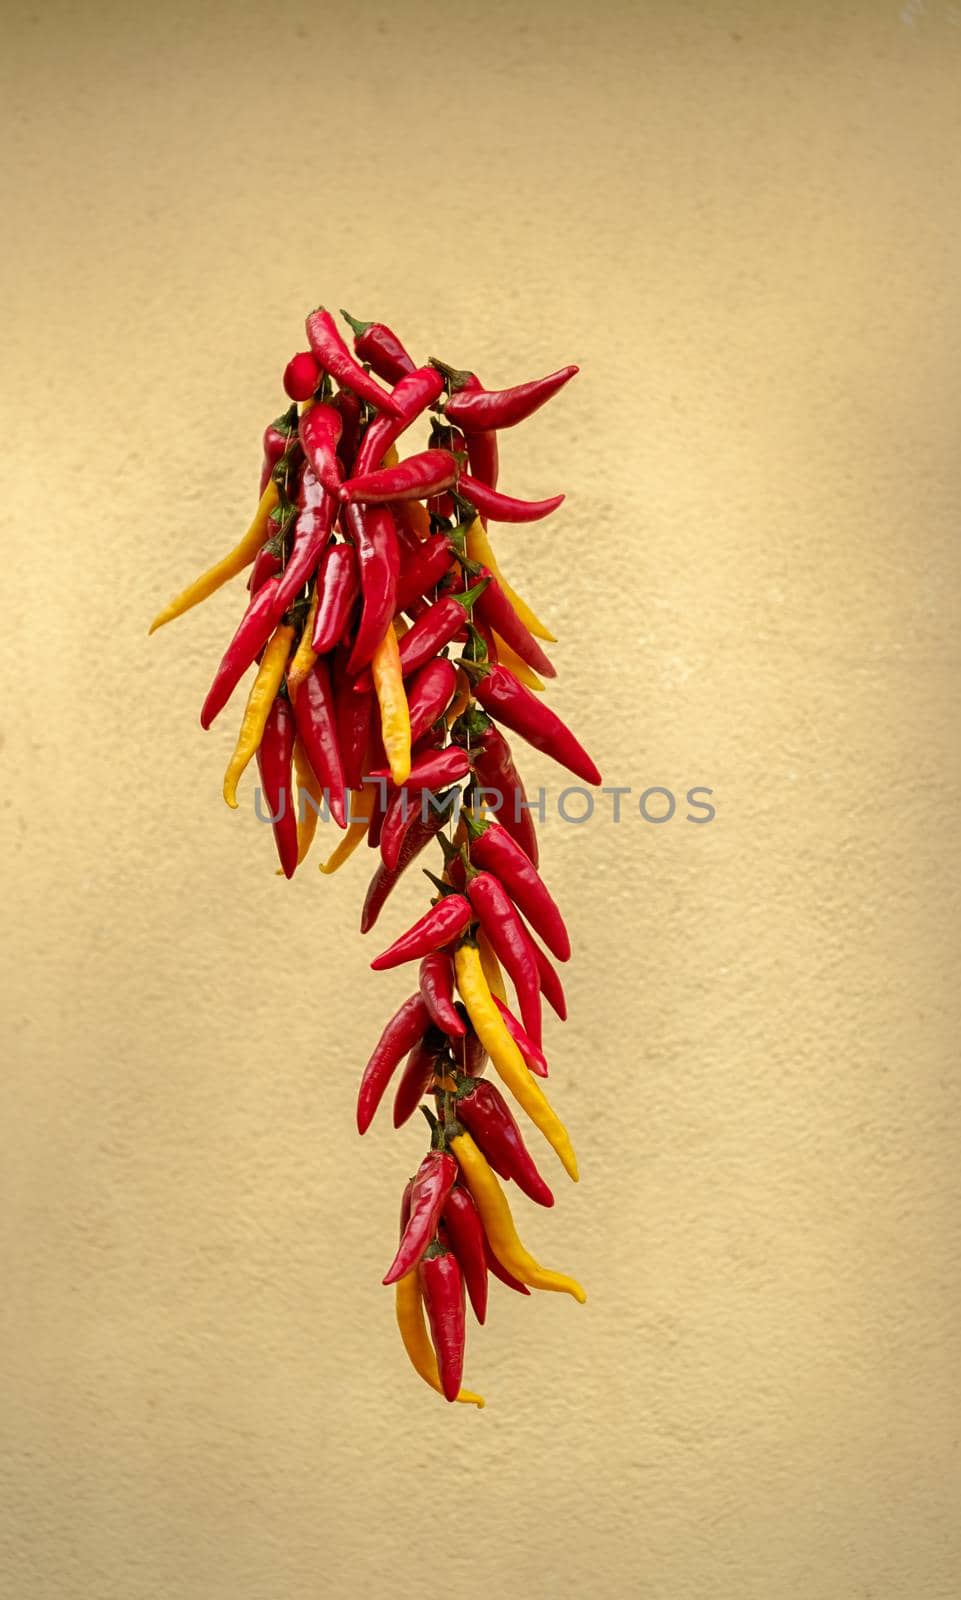 Dried peppers on a thread by Roberto